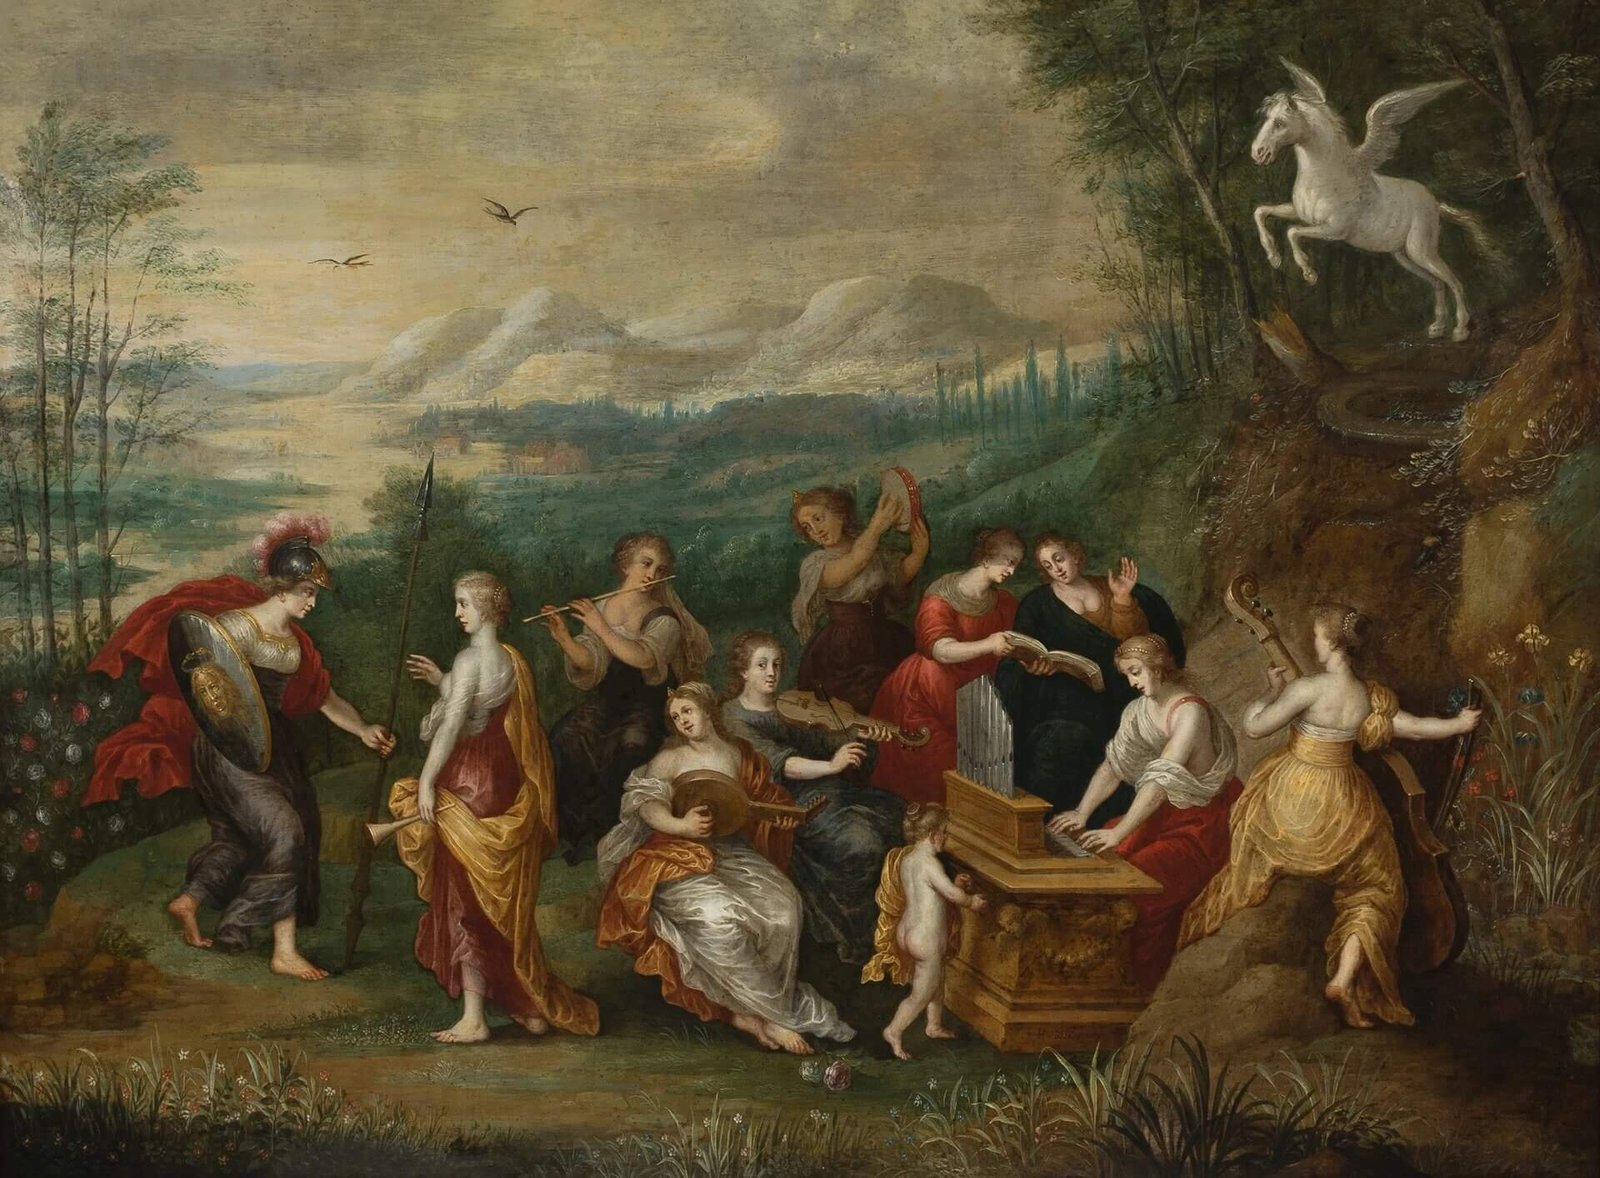 This painting represents the goddess of wisdom visiting the Muses.